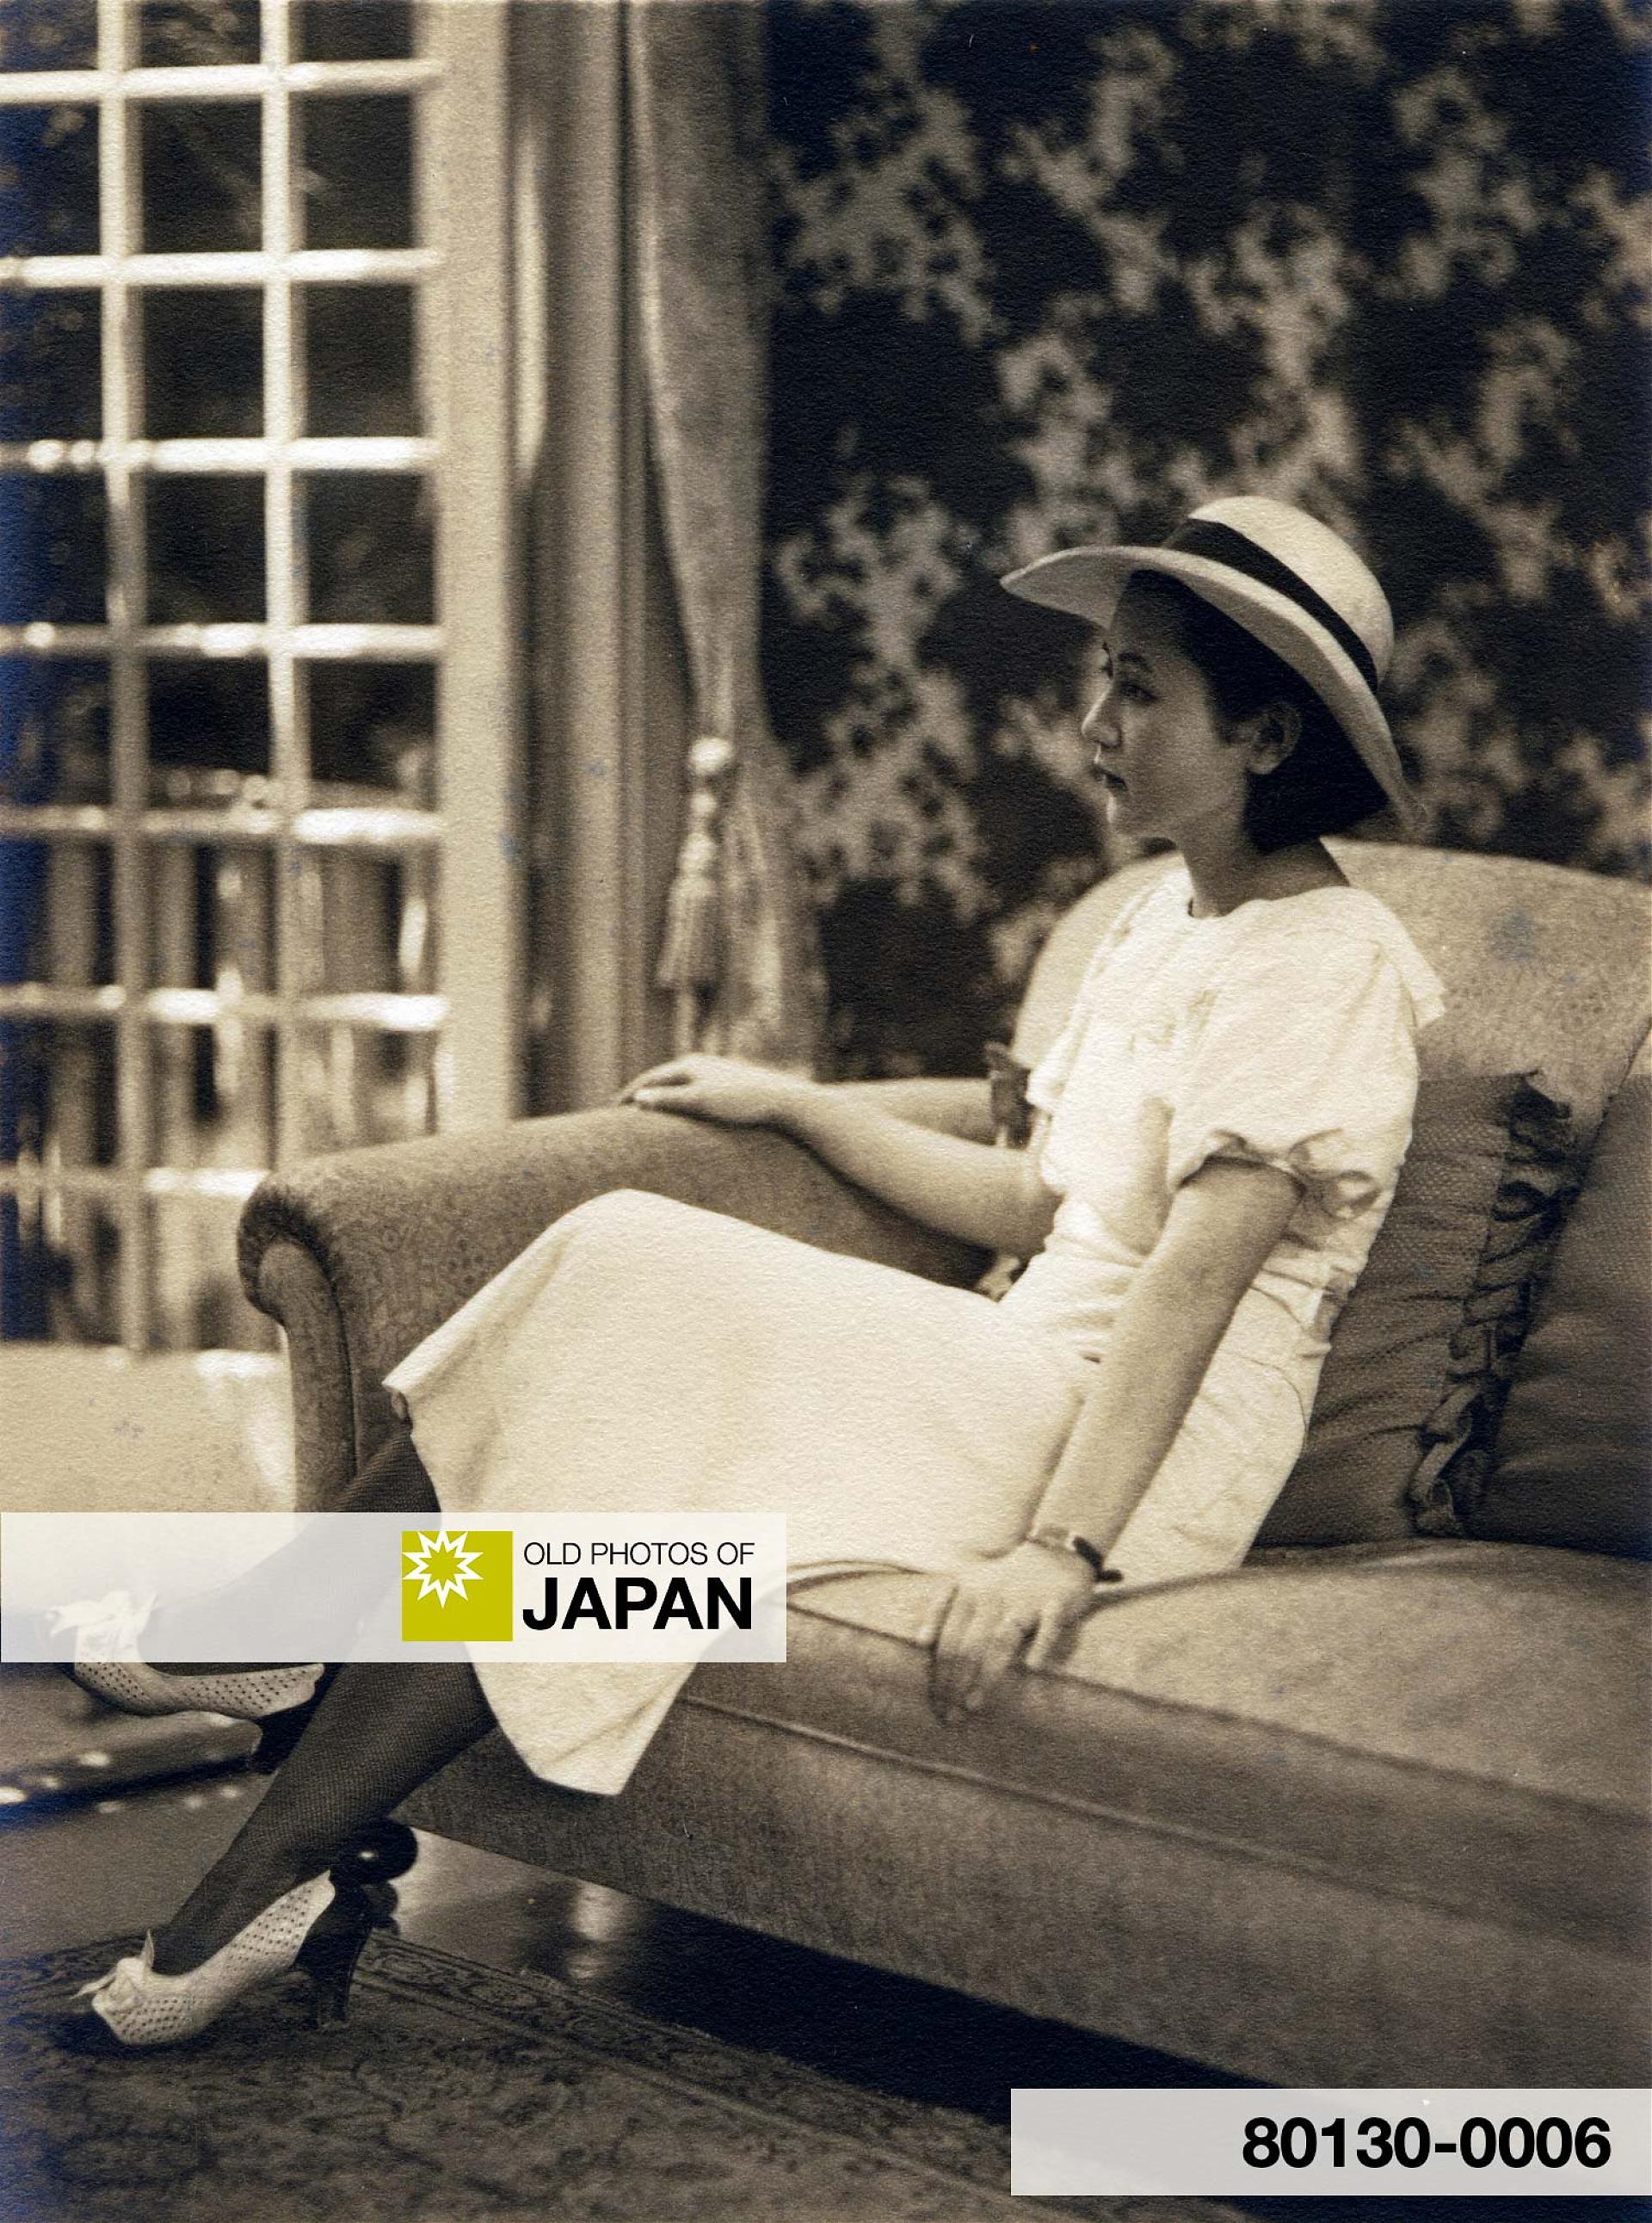 80130-0006 - Japanese woman in white dress, 1930s